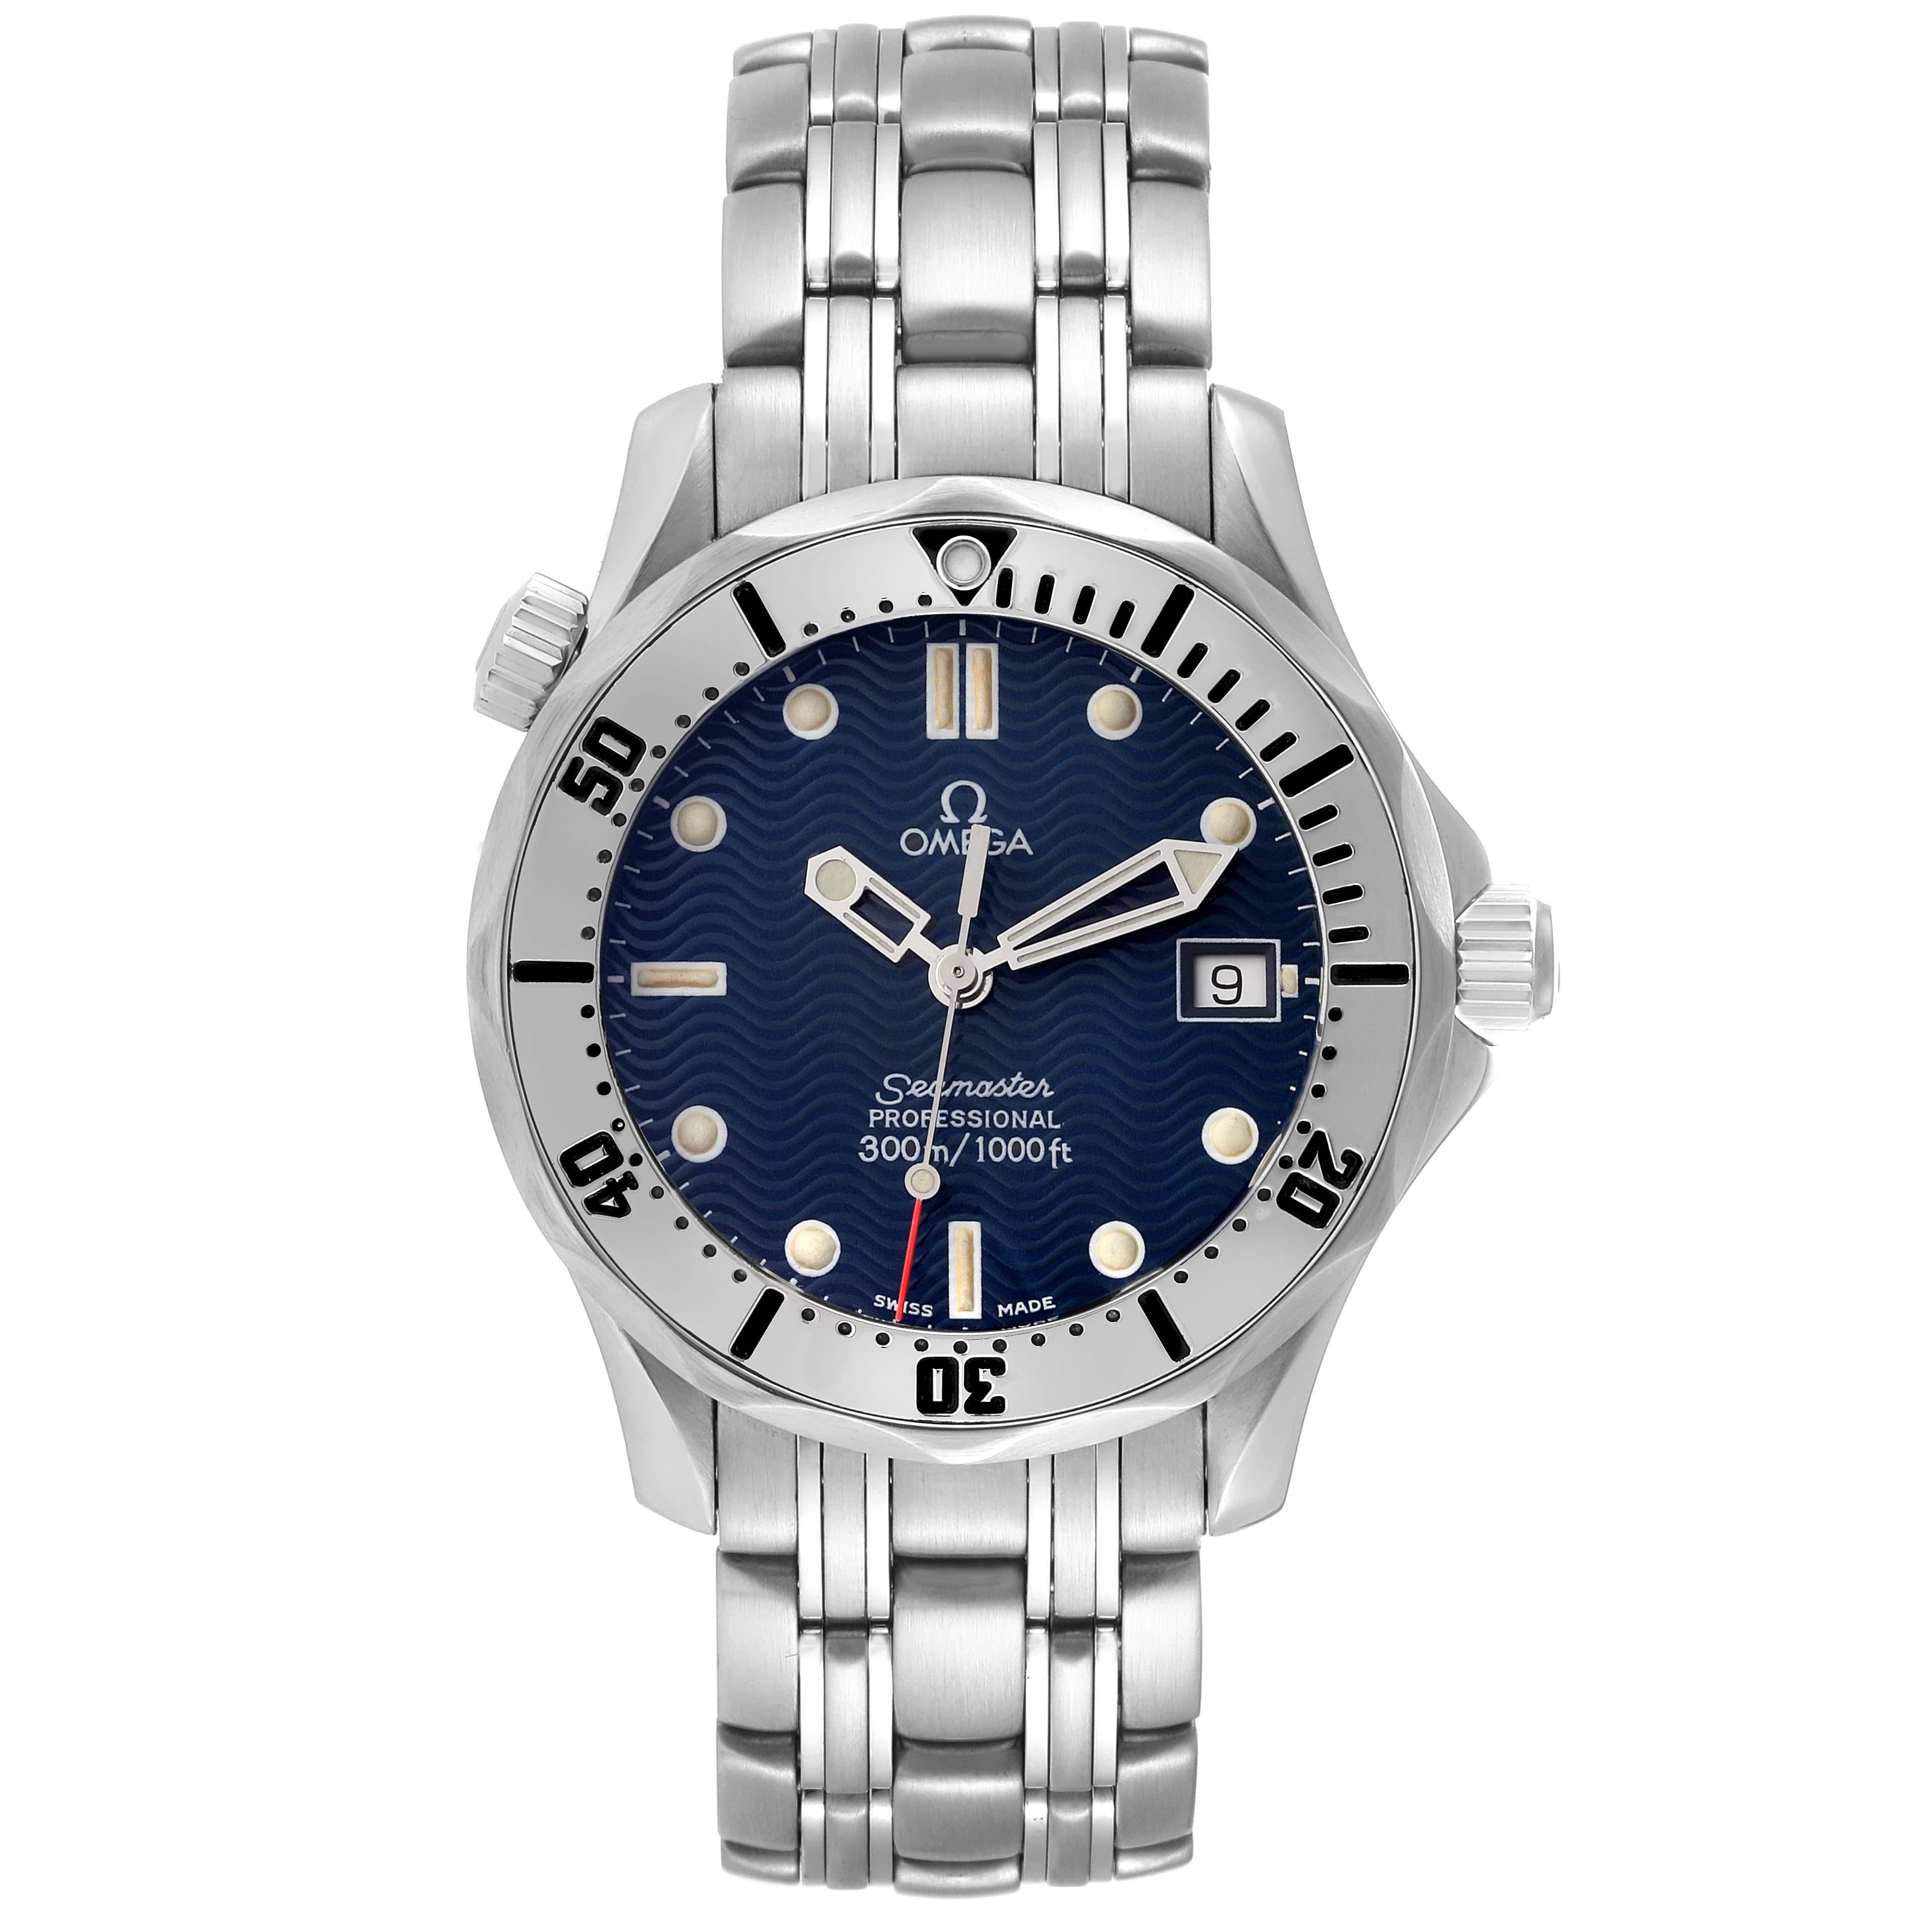 Omega Seamaster 300m Midsize 36mm Steel Mens Watch 2562.80.00. Quartz movement. Stainless steel case 36.25 mm in diameter. Omega logo on a crown. Unidirectional rotating stainless steel bezel. Scratch resistant sapphire crystal. Blue wave decor dial